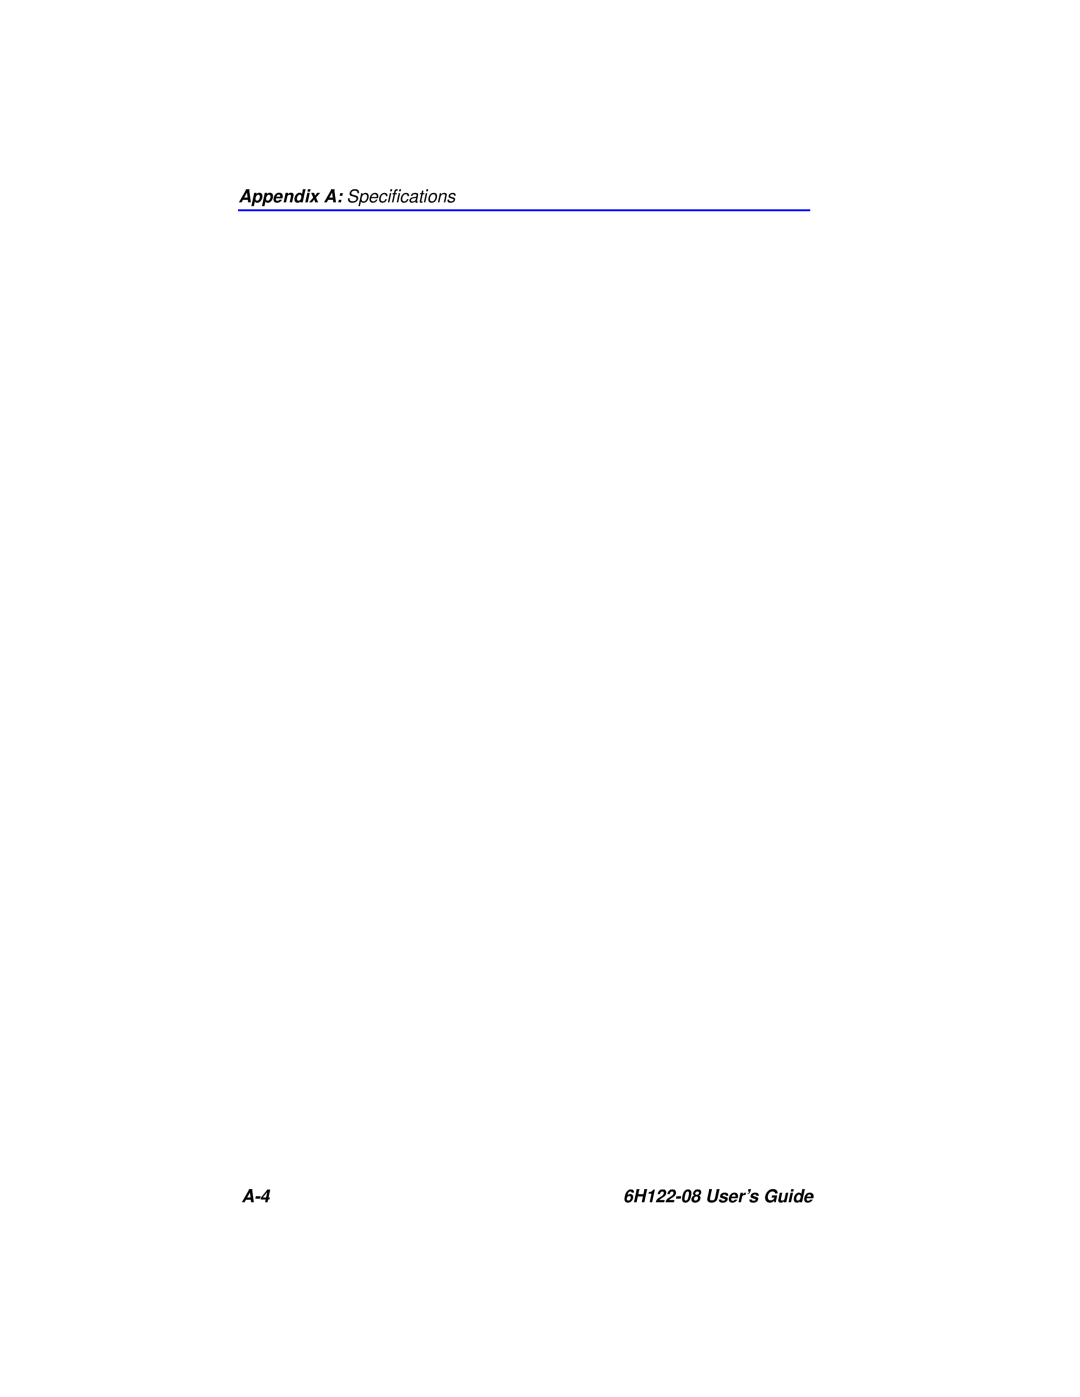 Cabletron Systems manual Appendix A Speciﬁcations, 6H122-08 User’s Guide 